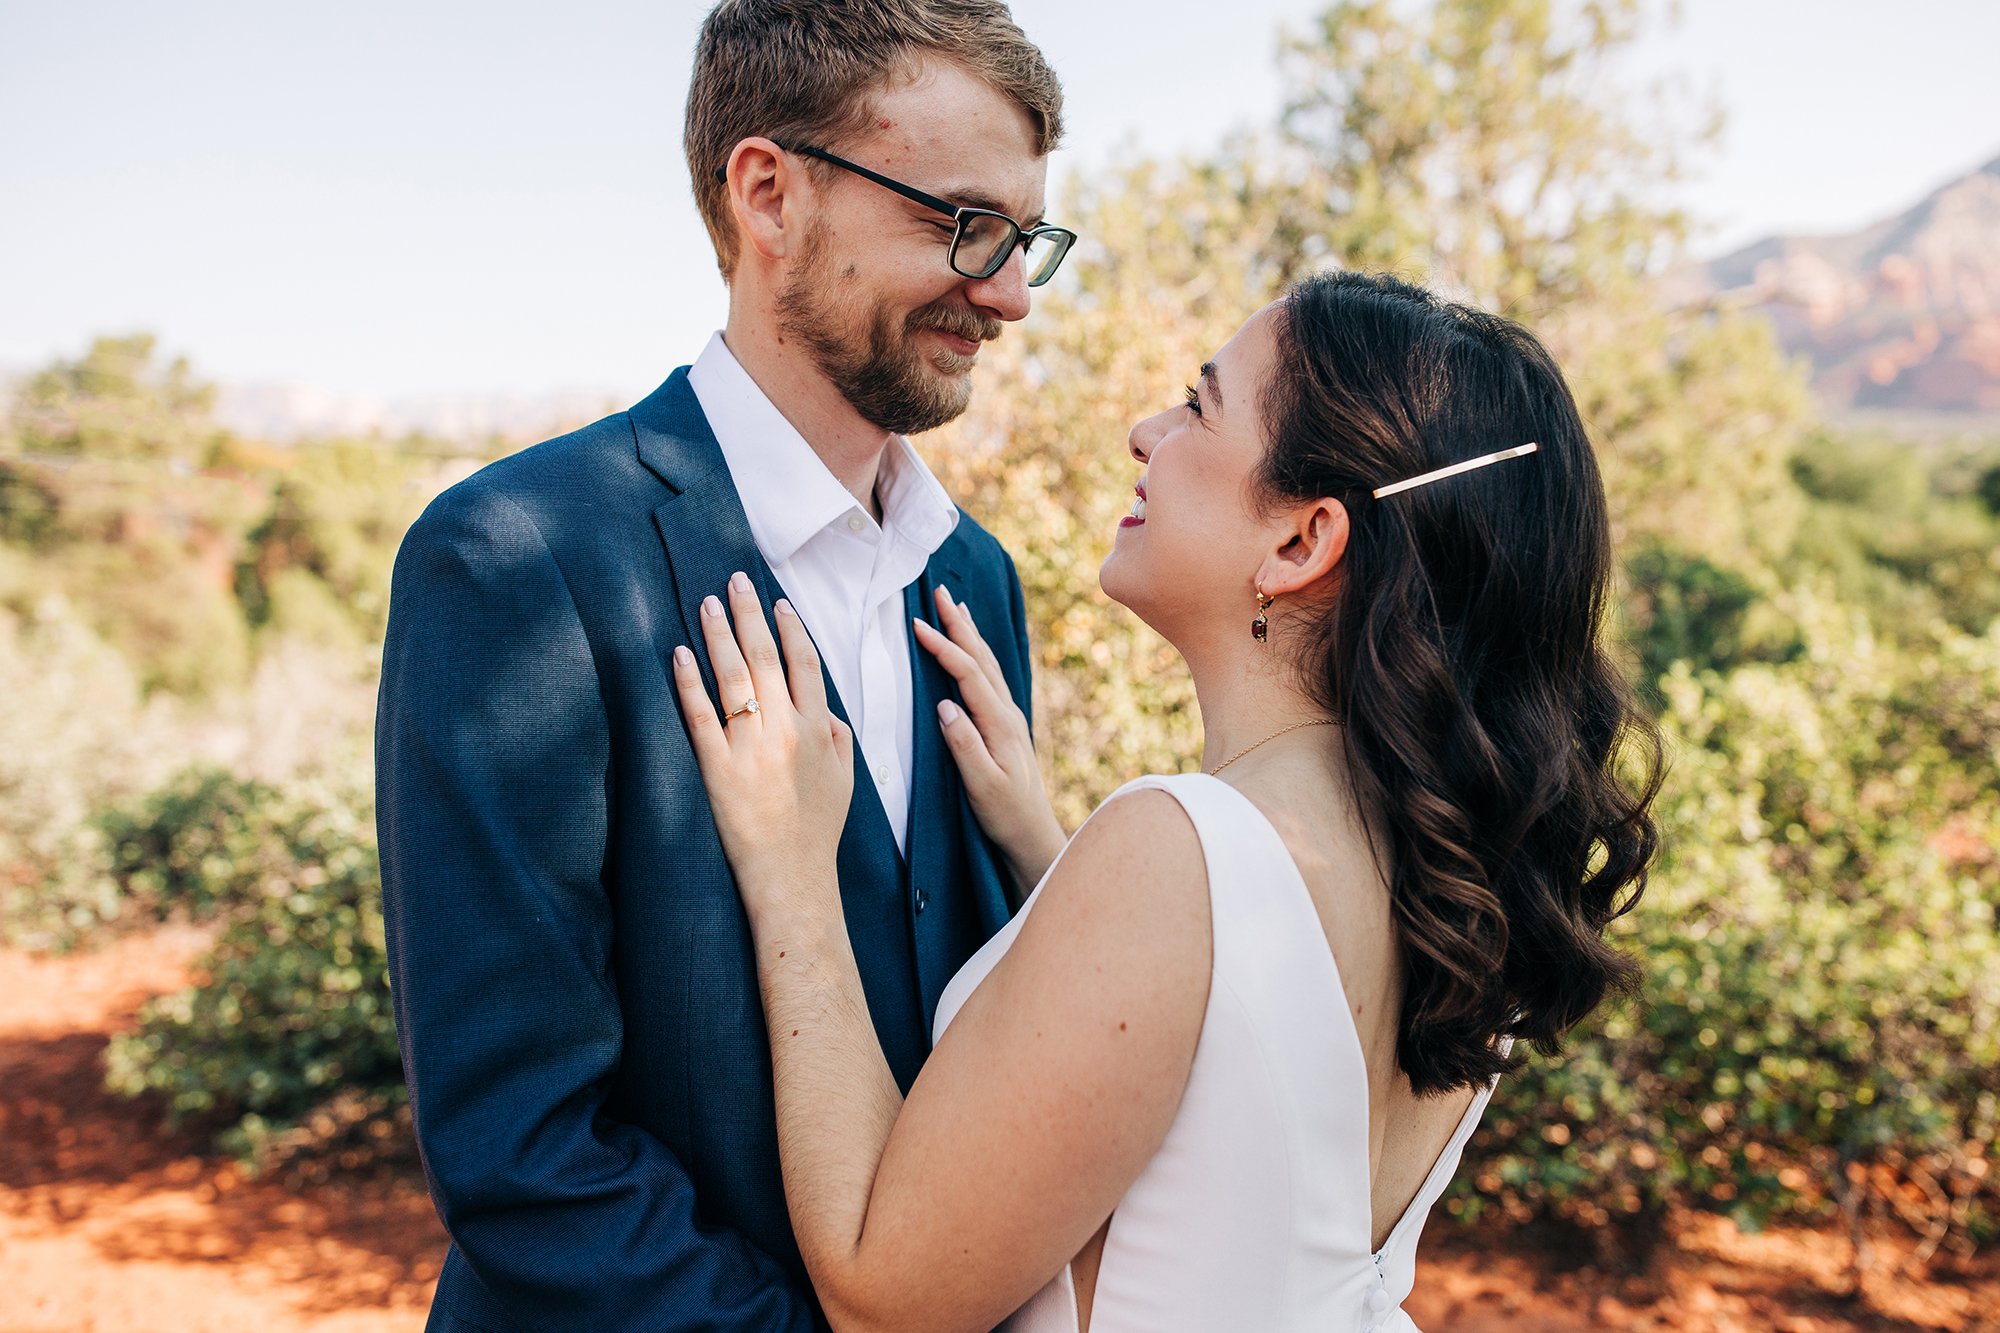 Steph and Matth look lovingly into eachother eyes during their elopement in Sedona Arizona